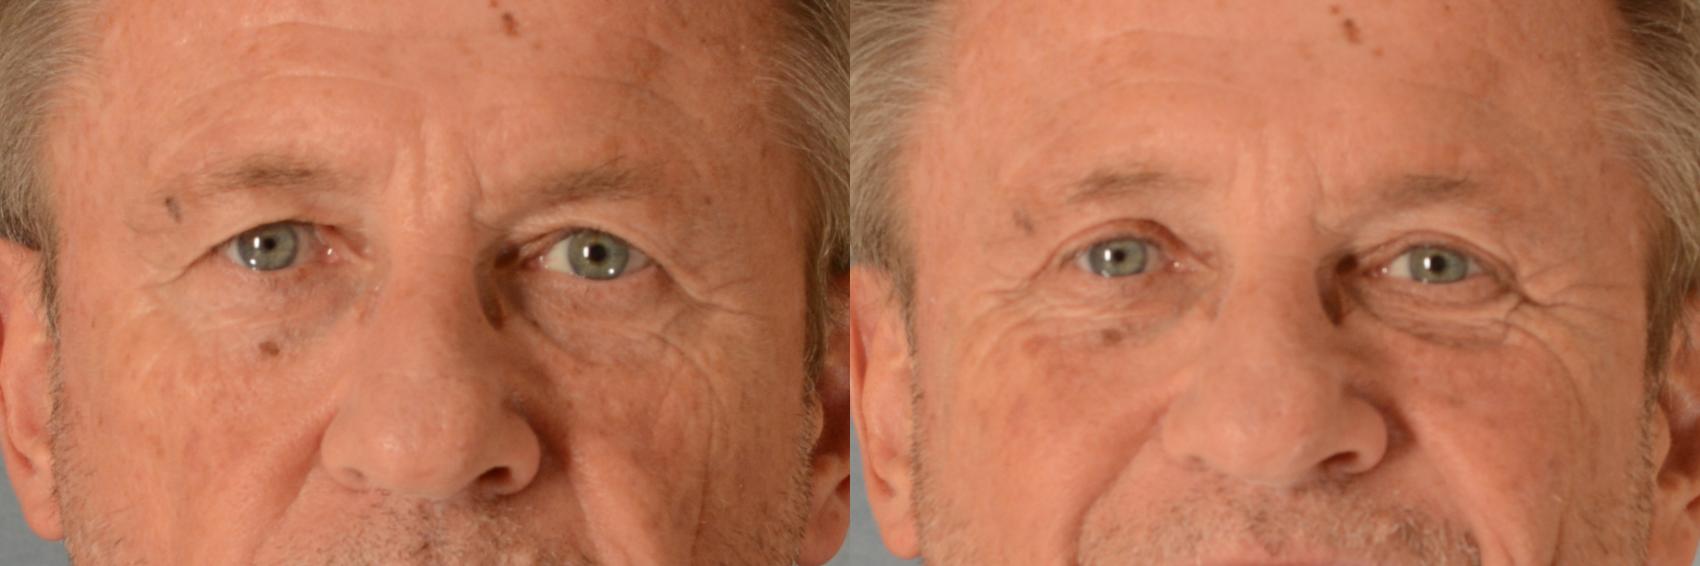 Before & After Eyelid Surgery (Blepharoplasty) Case 565 Front View in Tallahassee, FL